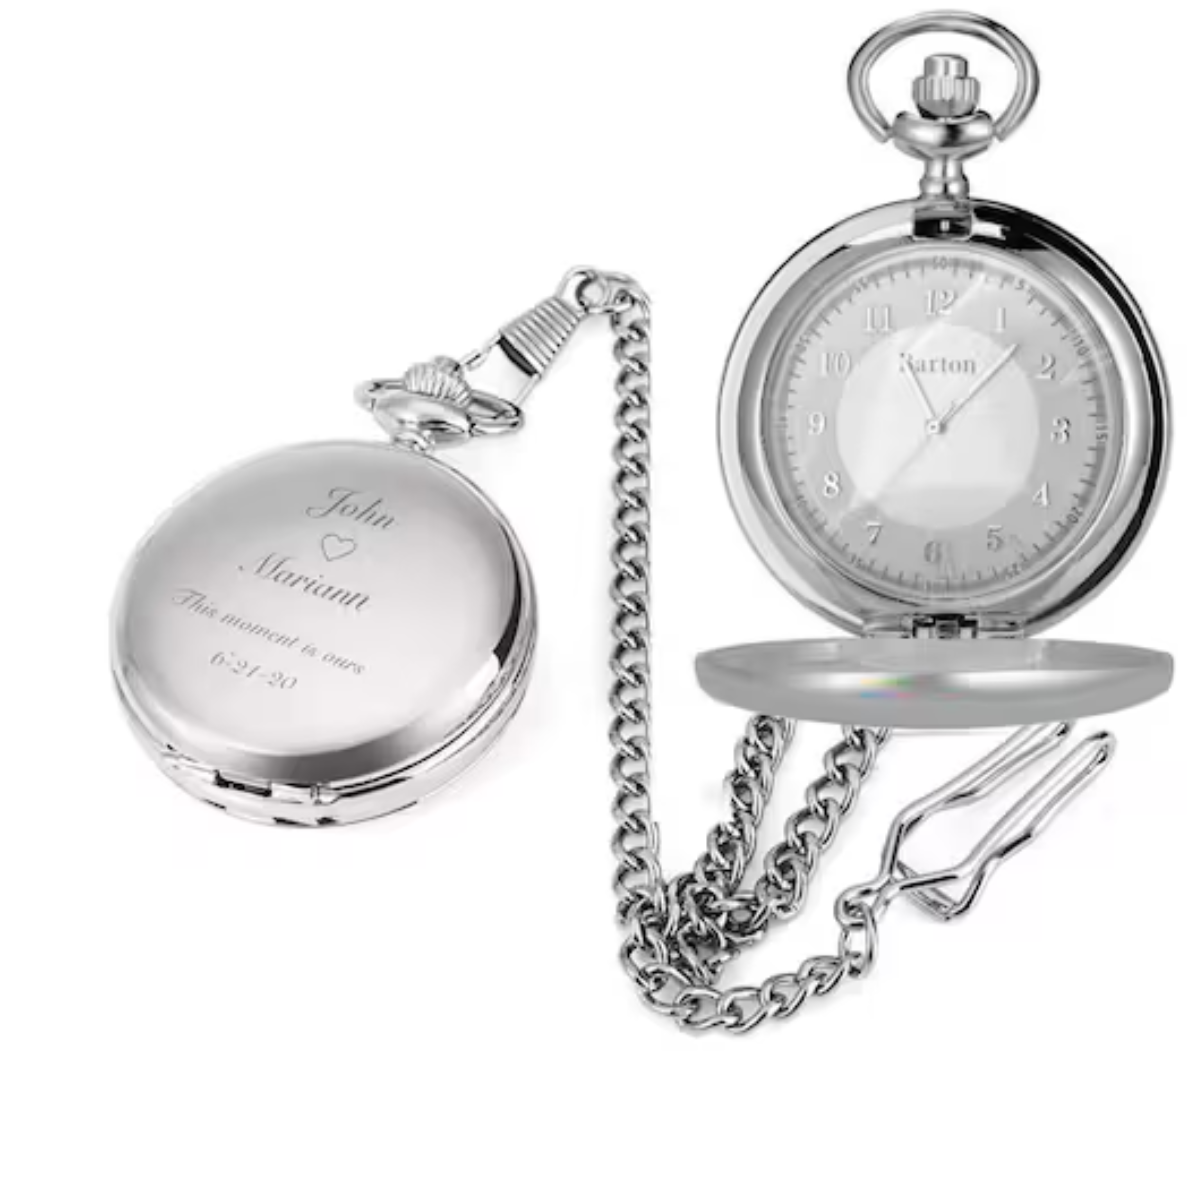 21. Timeless Love: Personalized Engraved Pocket Watch for a Memorable 2nd Anniversary Gift